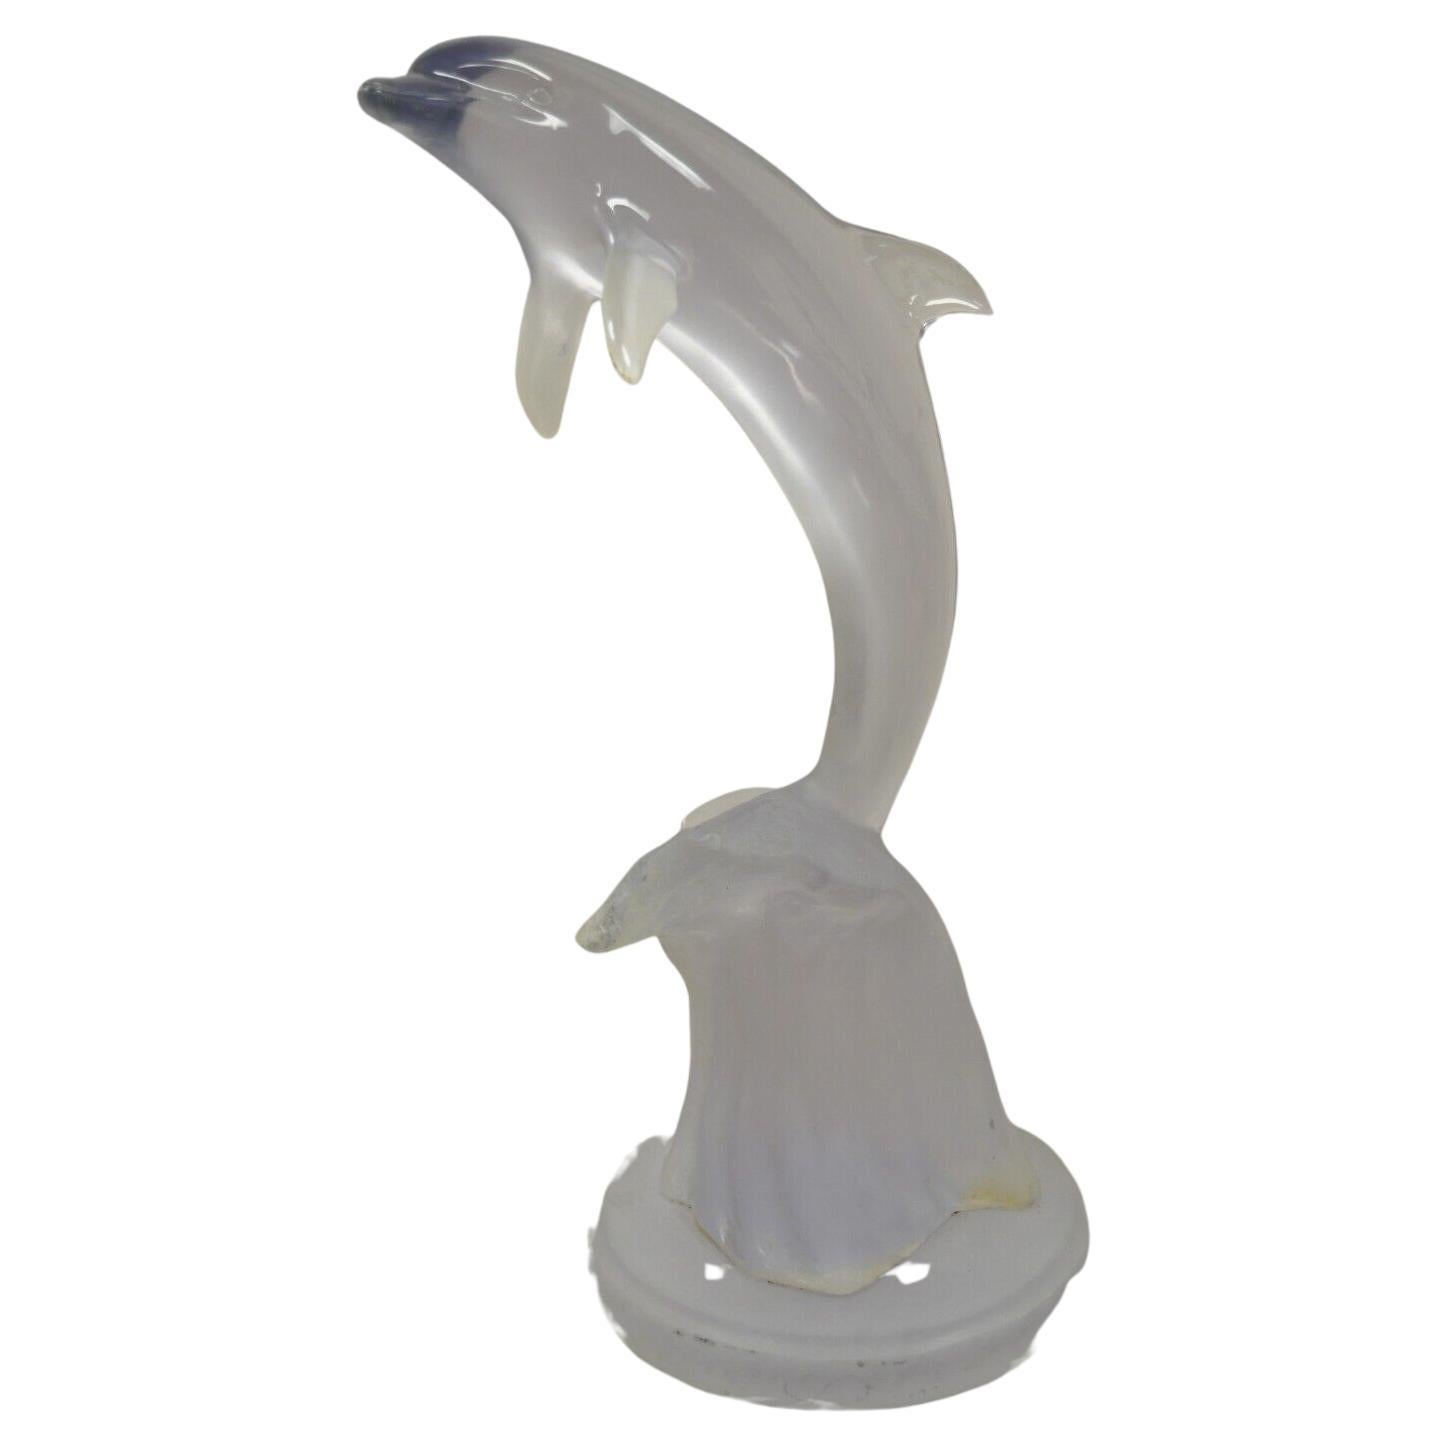 Donjo Acrylic Lucite Dolphin Statue Sculpture 394/750 Modern Figure For Sale